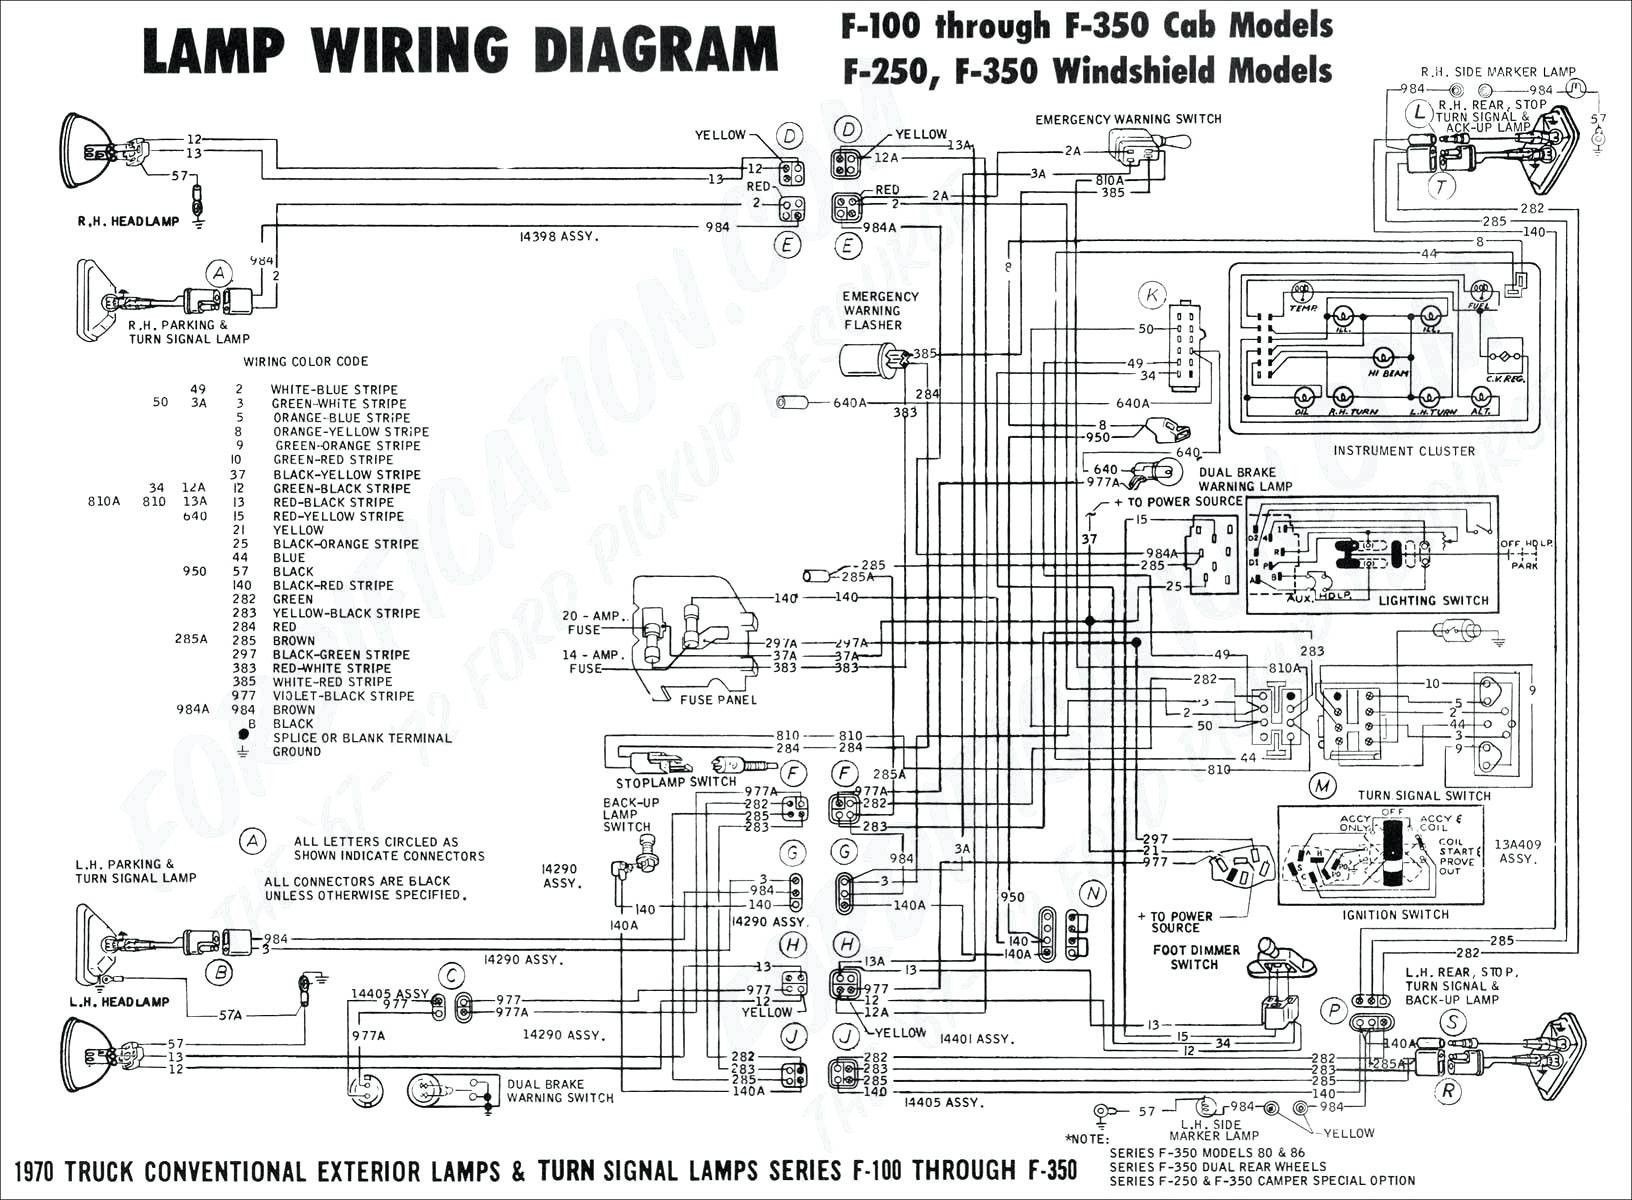 Automatic Transfer Switch Wiring Diagram Free New Wiring Diagram Symbols Hvac Diagrams Digramssample Of Automatic Transfer Switch Wiring Diagram Free